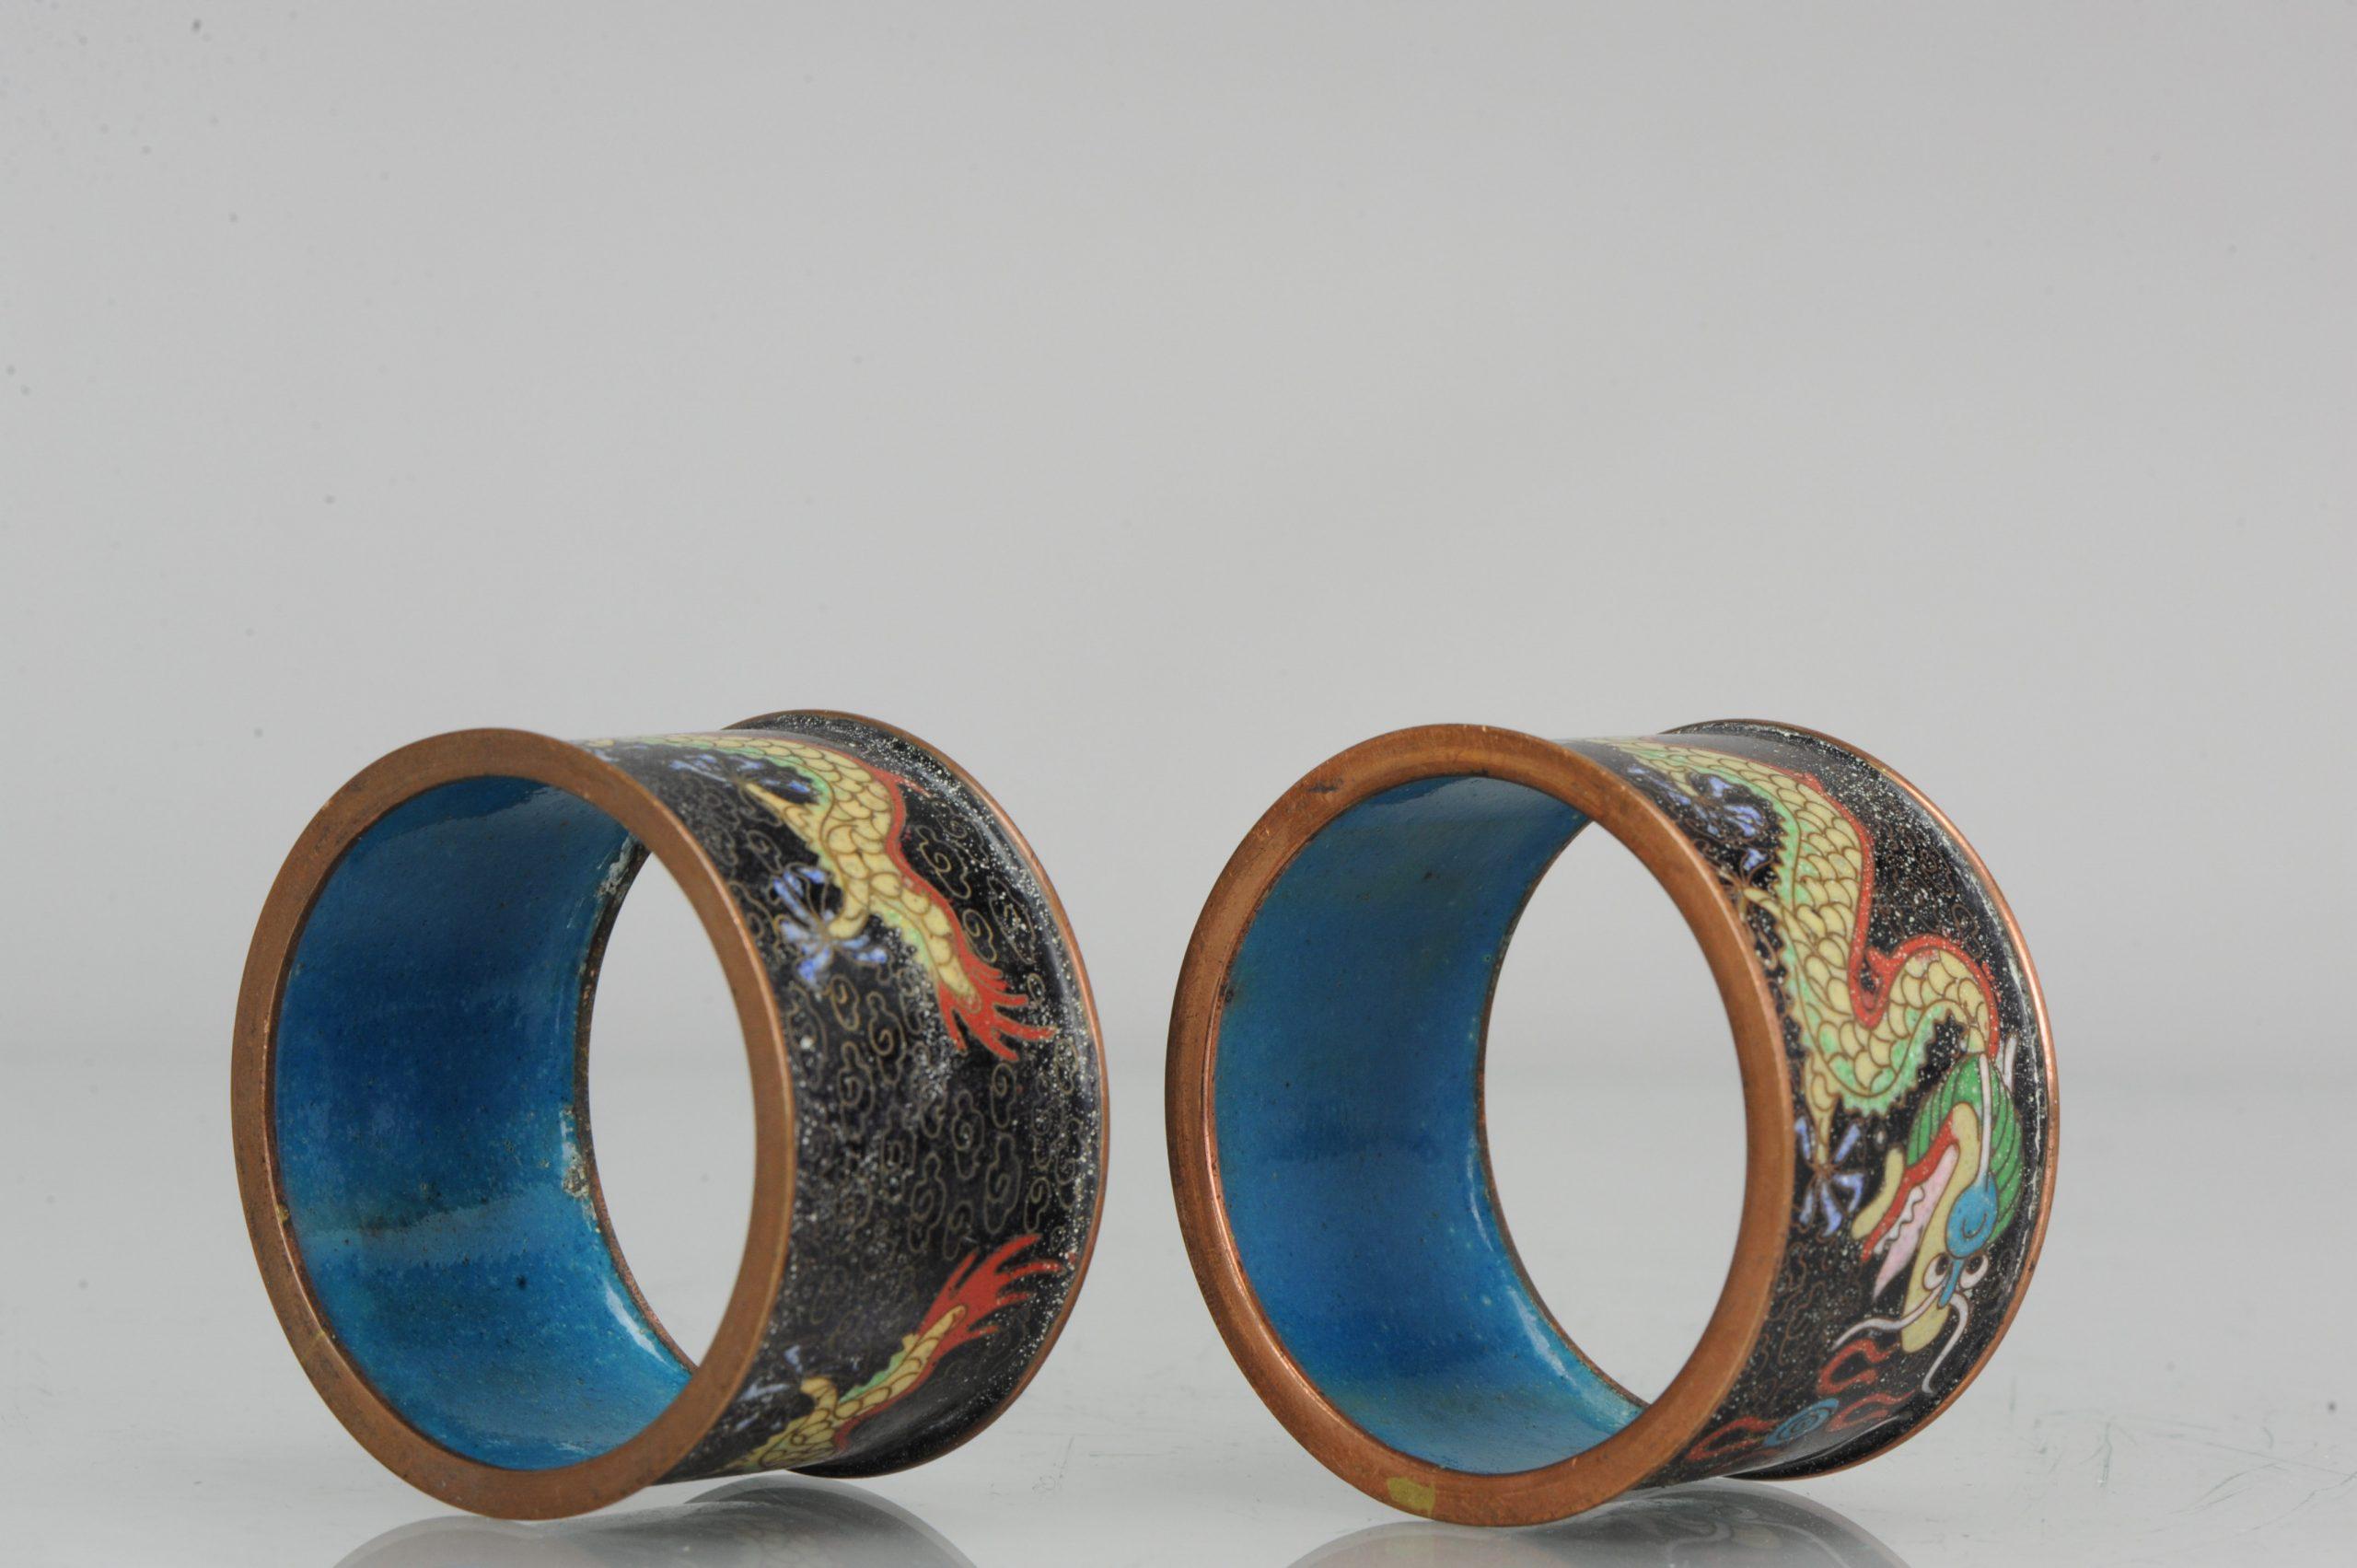 Lovely Napkin Rings with dragon scene.Lovely small dish.

Additional information:
Material: Bronze Enamel 
Period: ca 1900
Condition: Overall Condition; No damages.
Dimension: Ø 5.6 cm